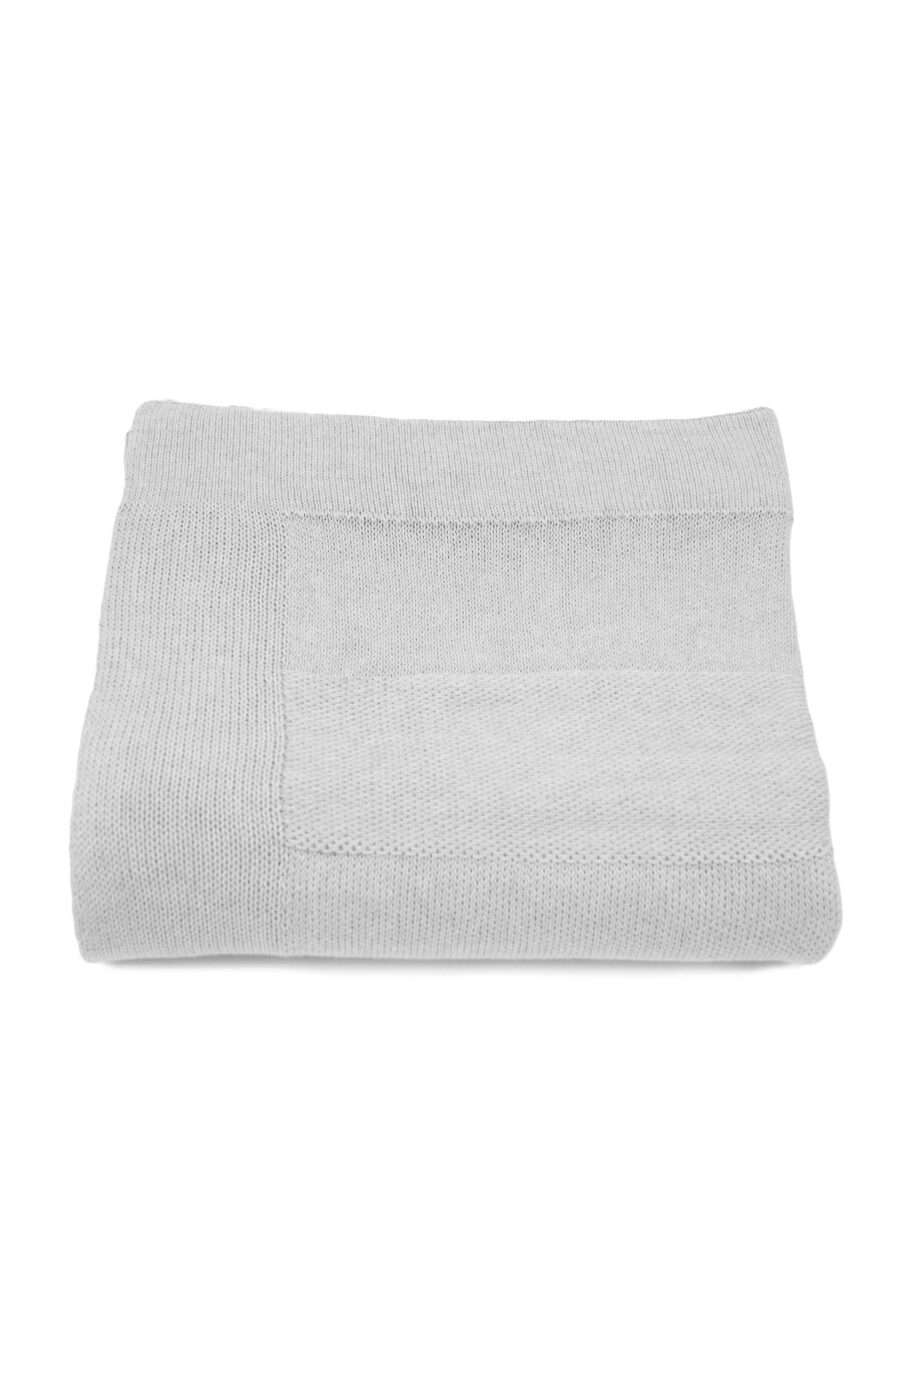 urban lilly white knitted cotton throw large